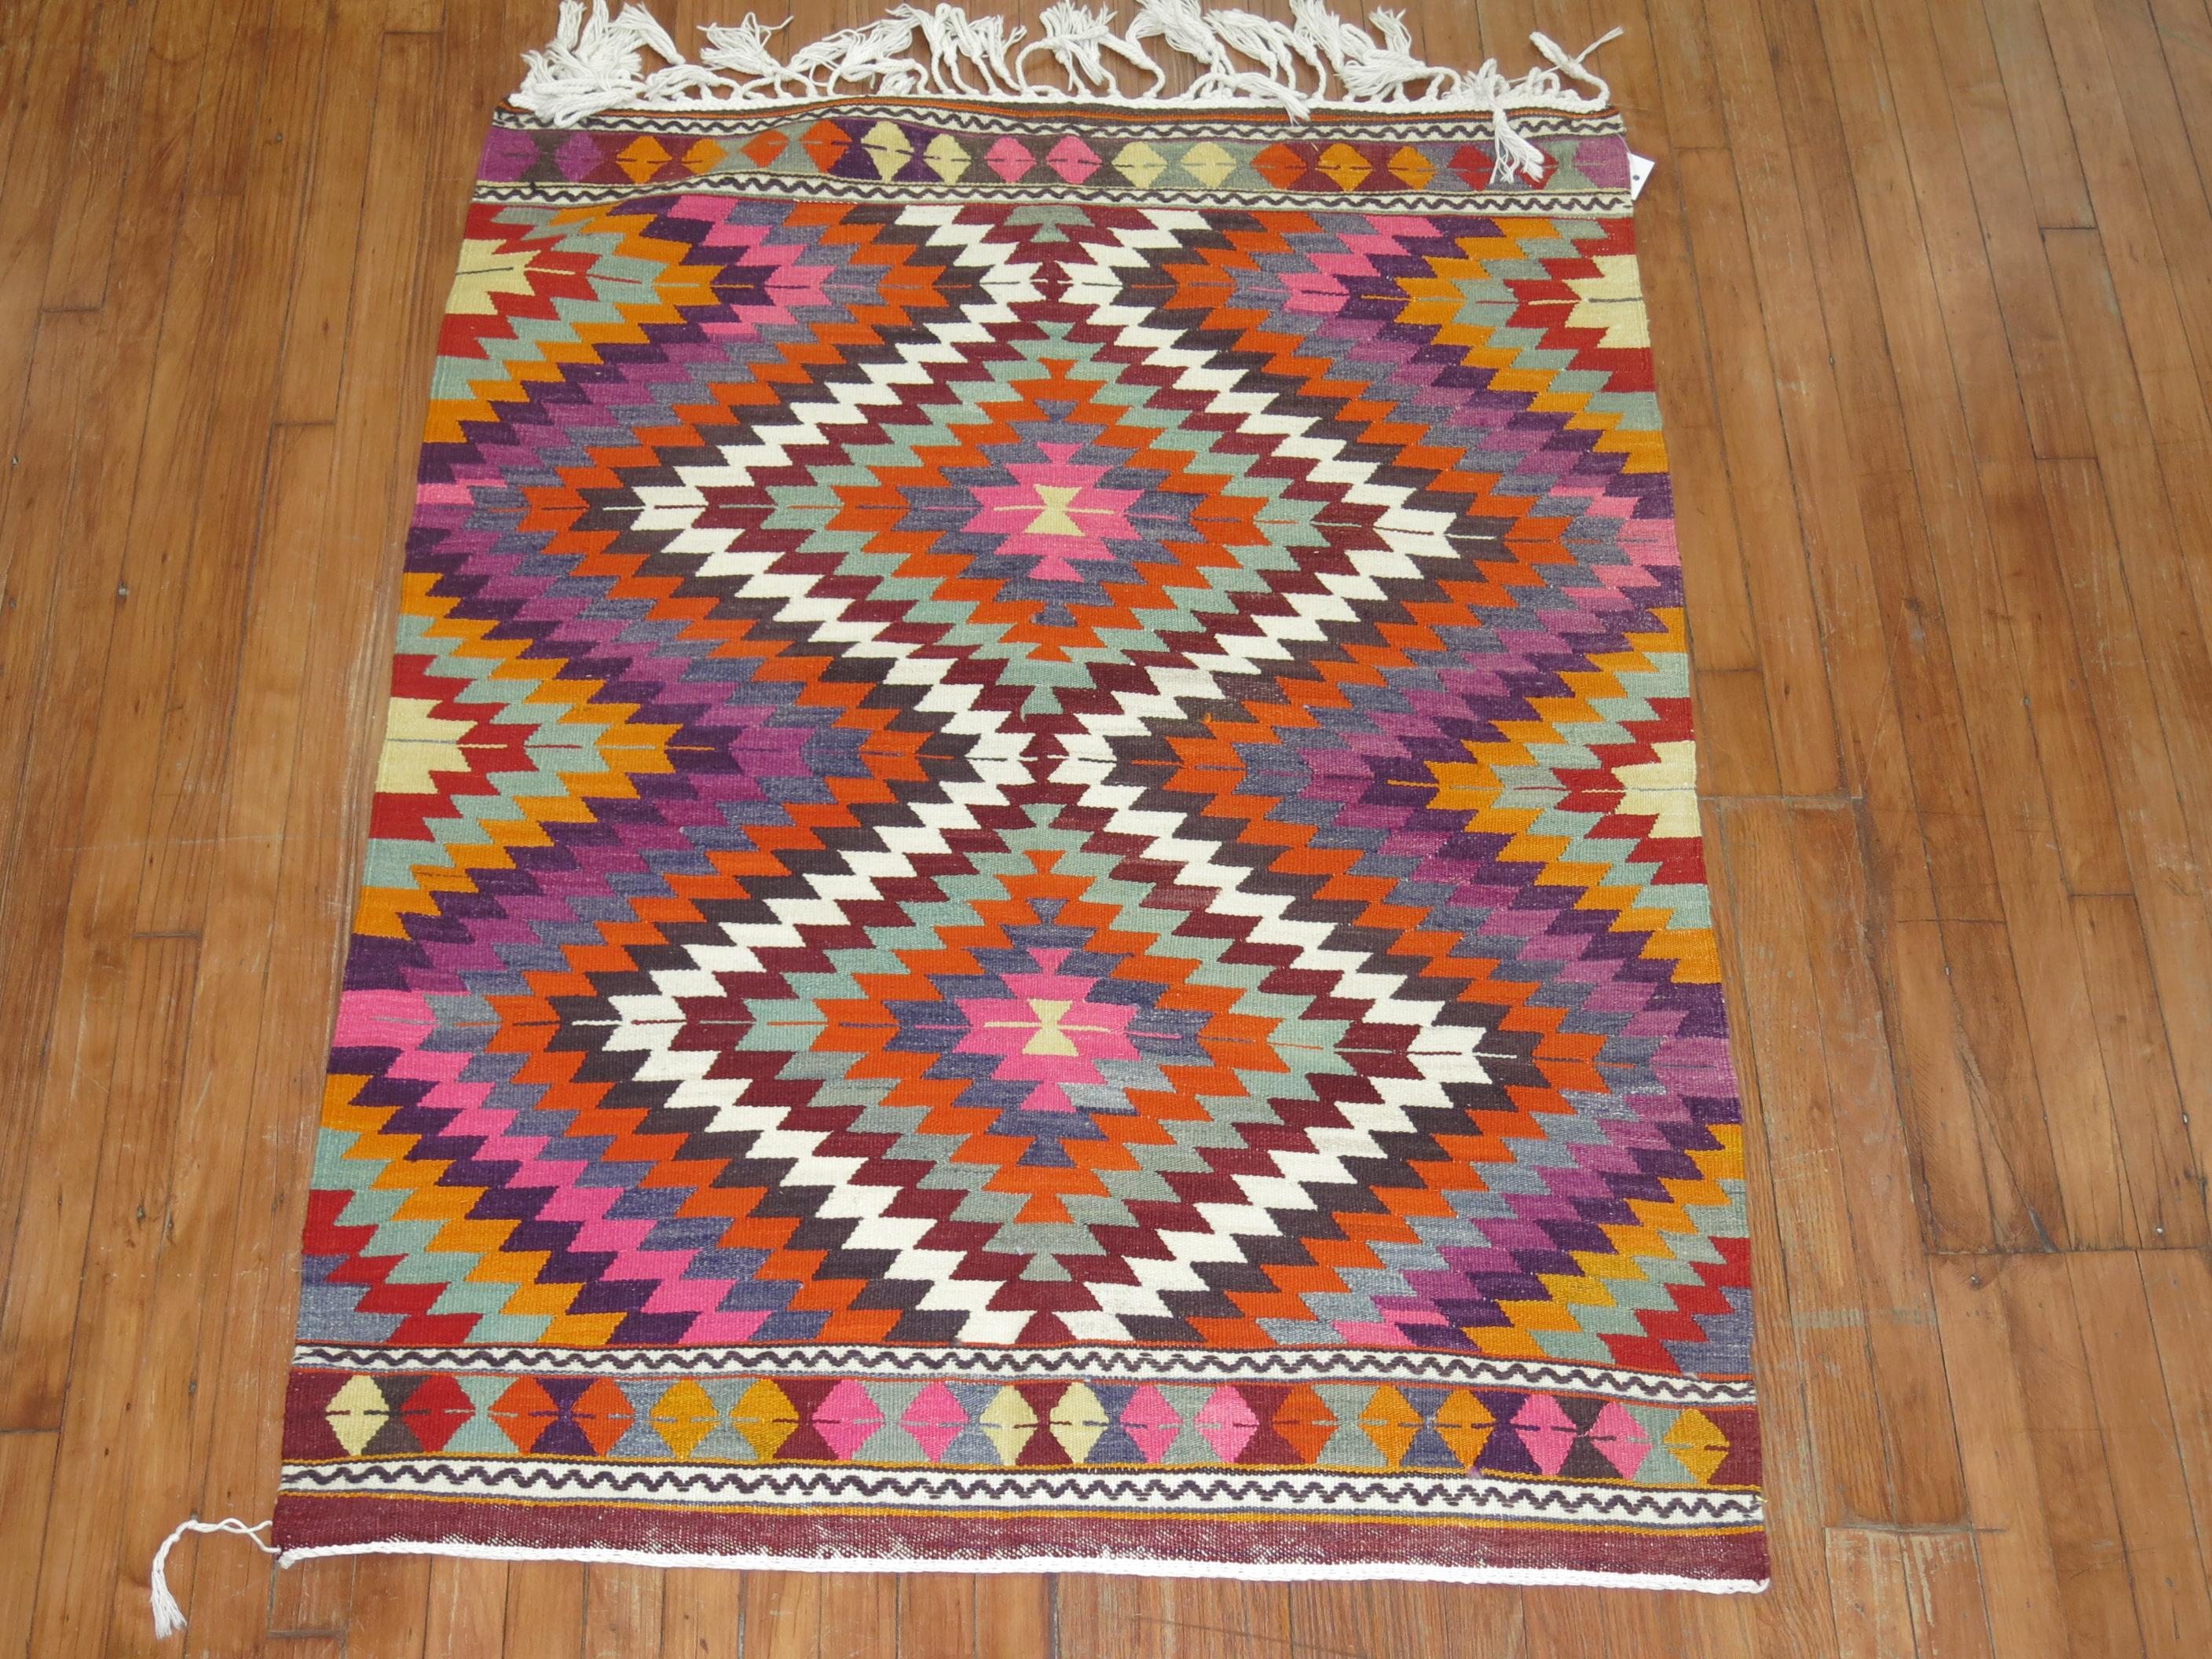 Colorful hand knotted mid-20th century Turkish Kilim in excellent condition

Measures: 3'9'' x 4'11''.